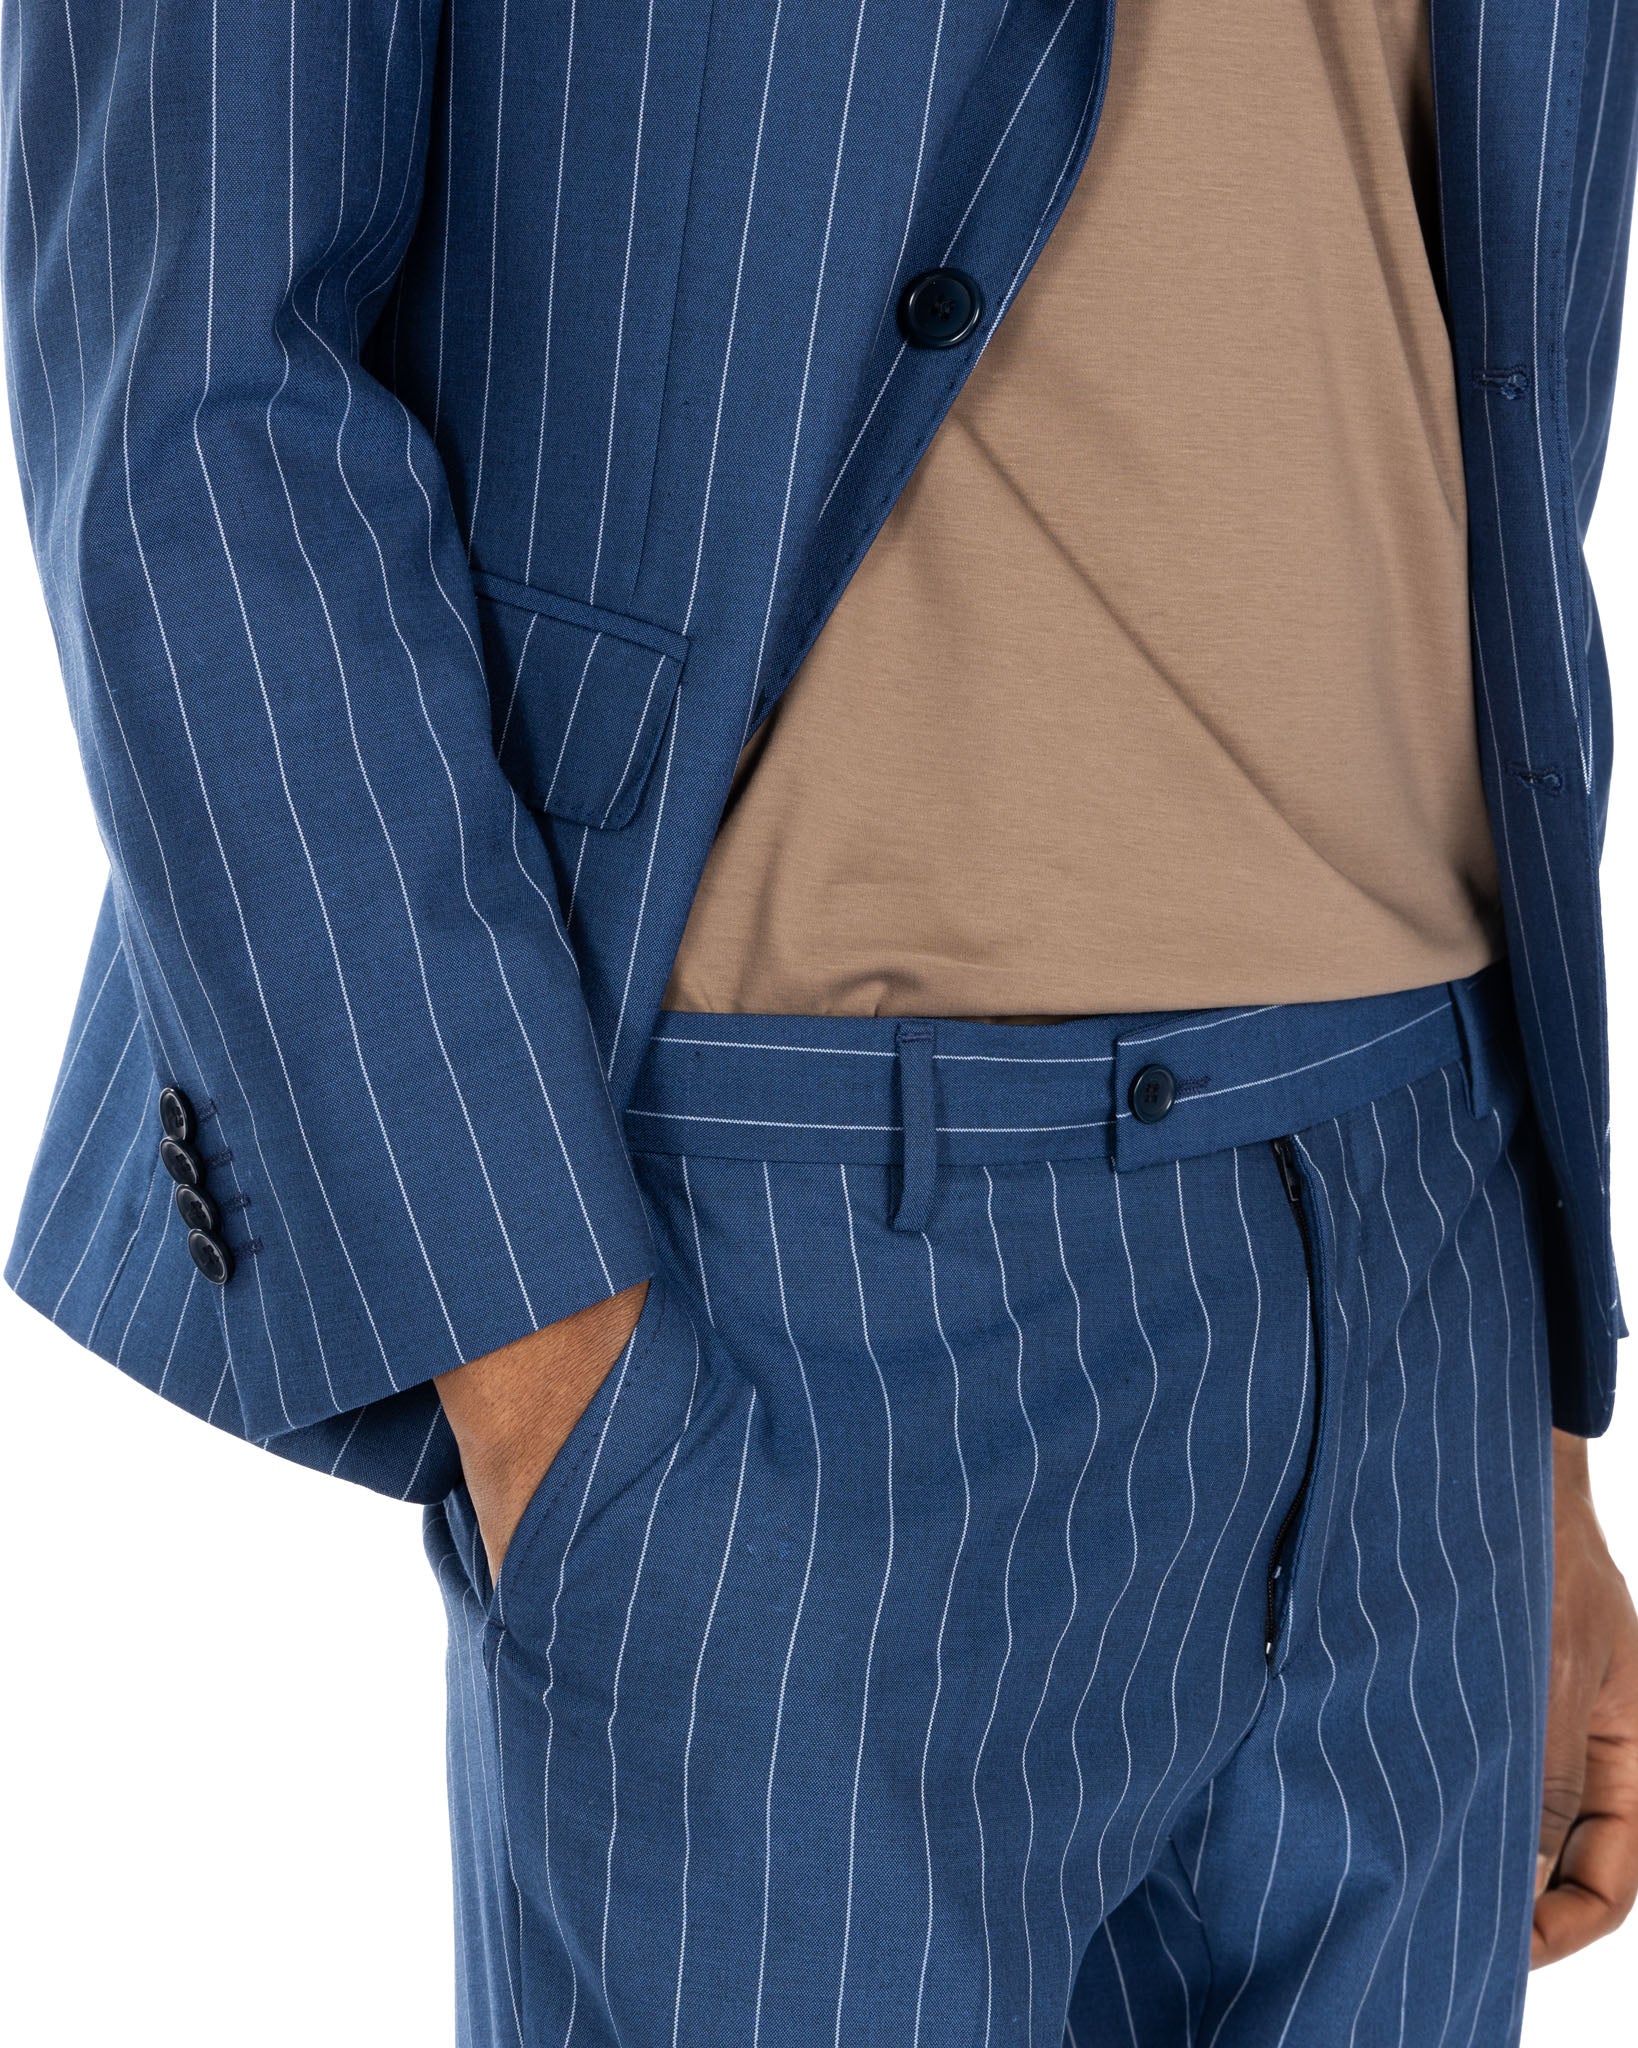 Lille - blue pinstripe single-breasted suit